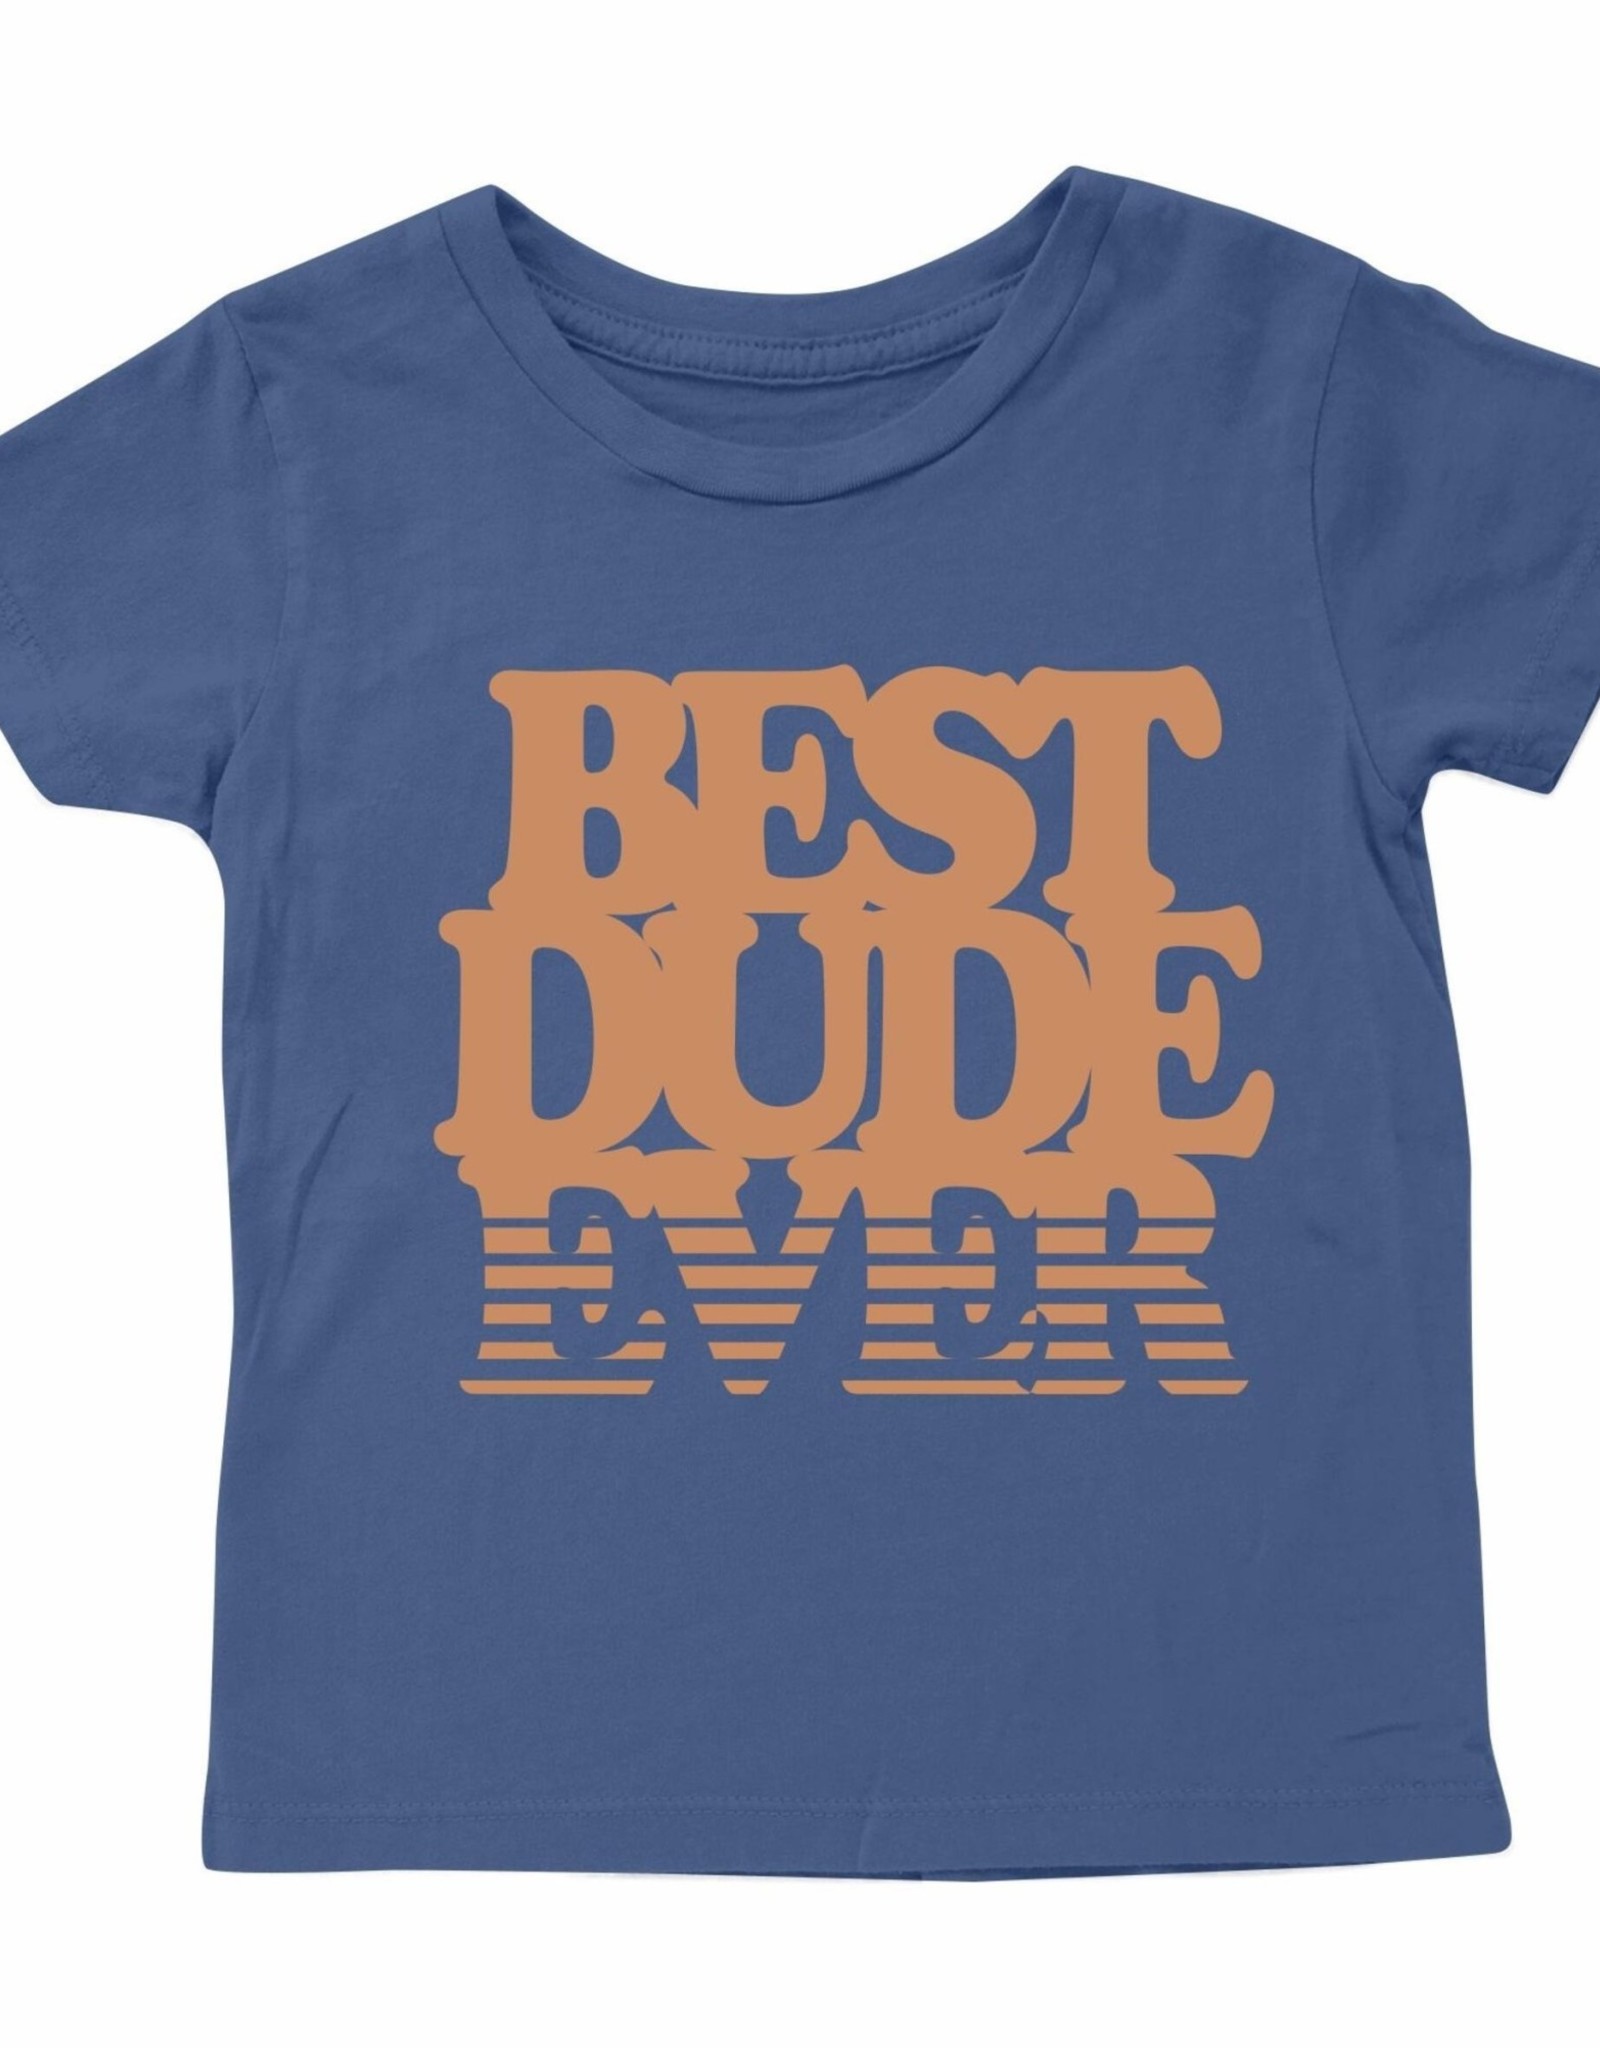 Tiny Whales best dude ever tee